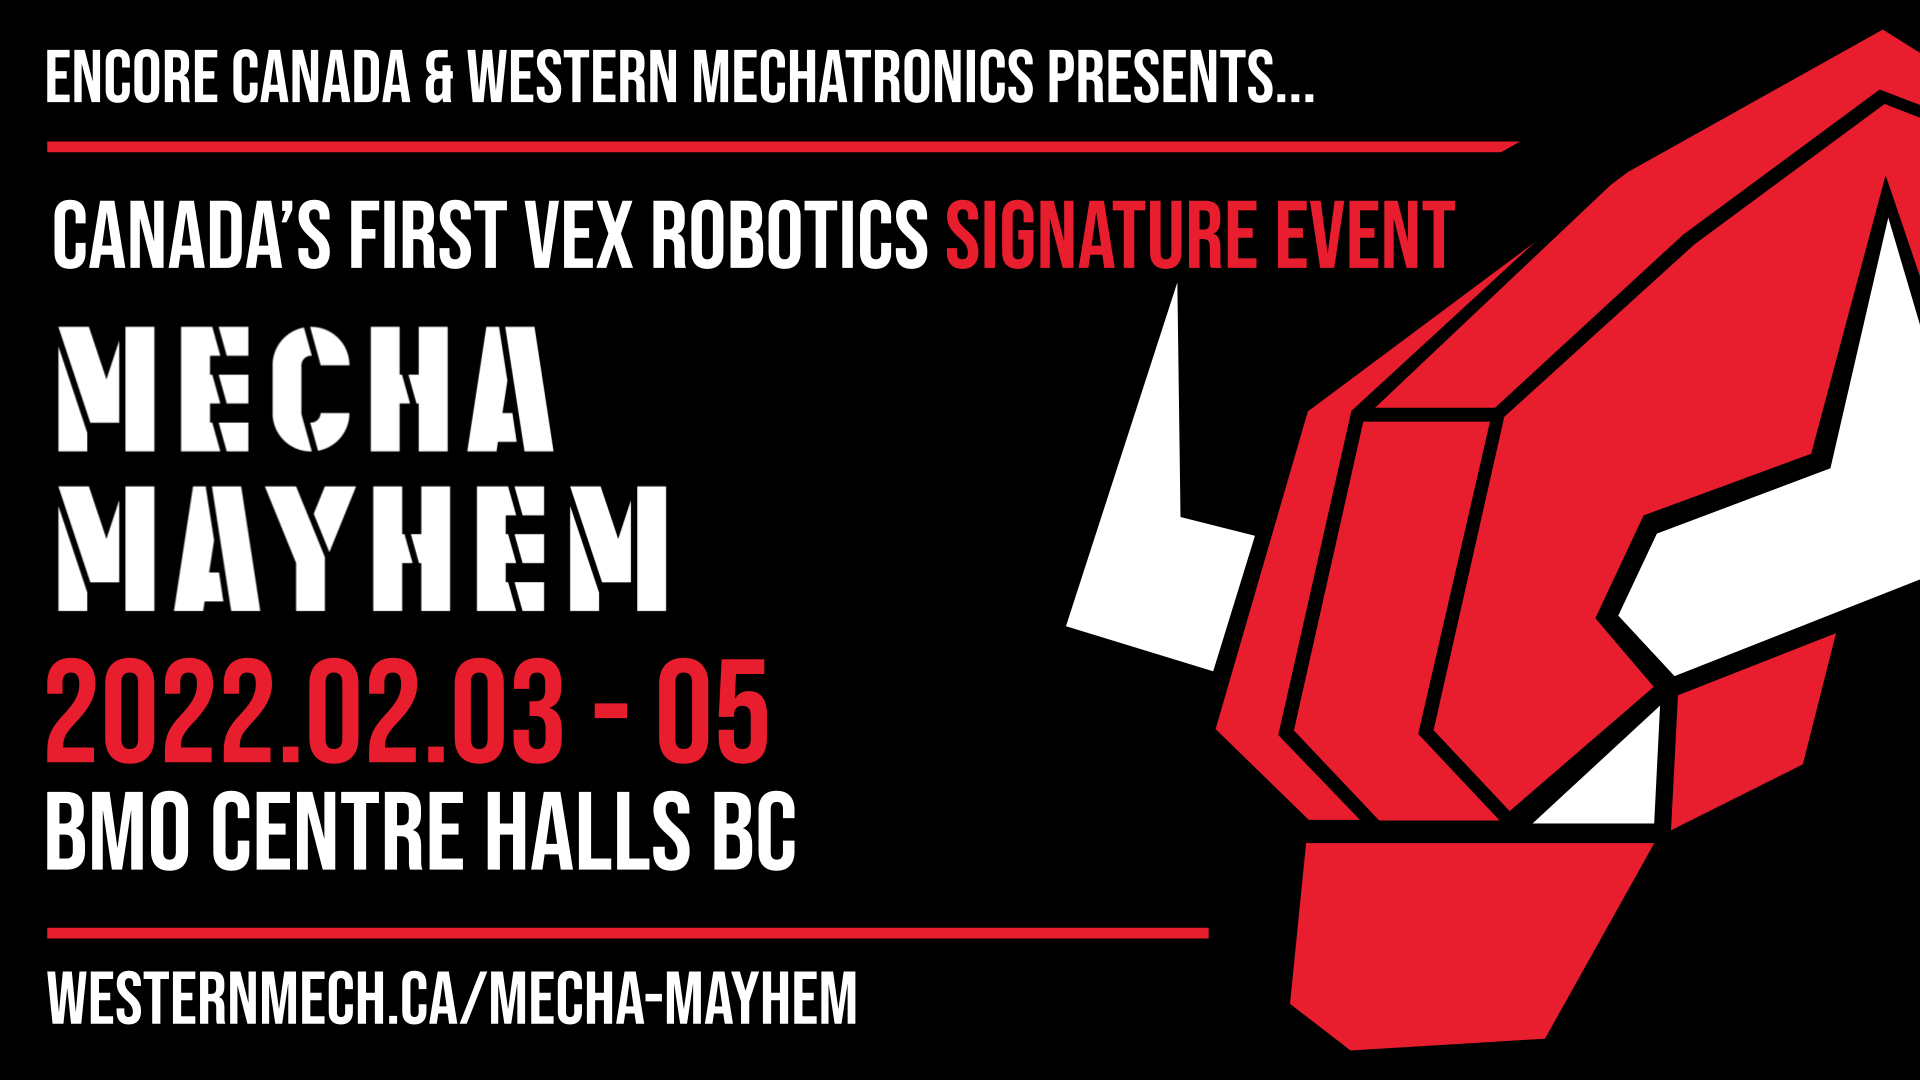 Mecha Mayhem Signature Event Presented by Encore Canada | HS & MS Blended